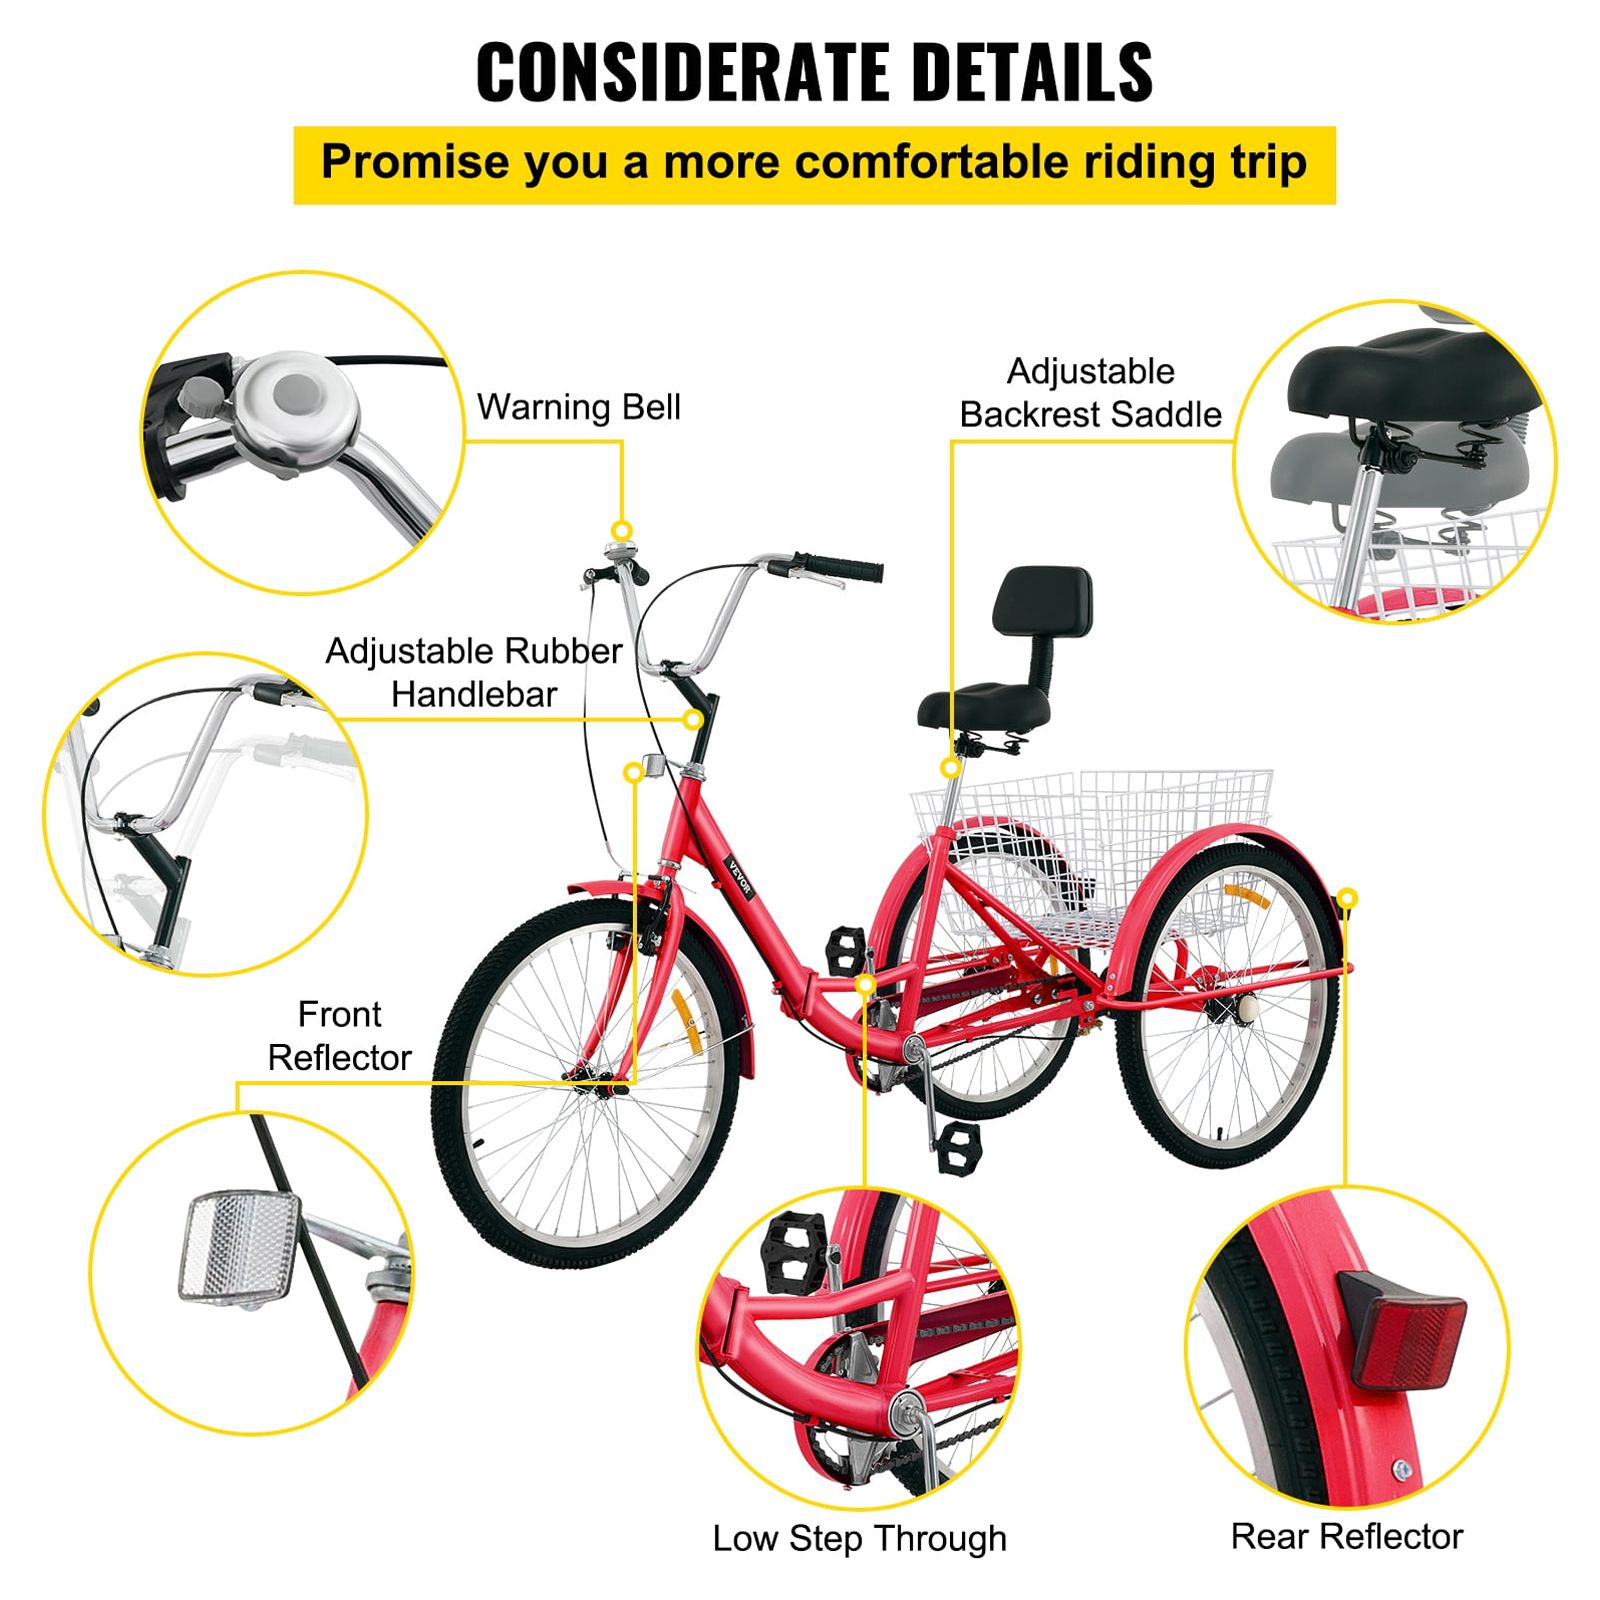 VEVOR Foldable Tricycle 24 inch Wheels,1-Speed Red Trike, 3 Wheels Colorful Bike with Basket, Portable and Foldable Bicycle for Adults Exercise Shopping Picnic Outdoor Activities - image 5 of 9